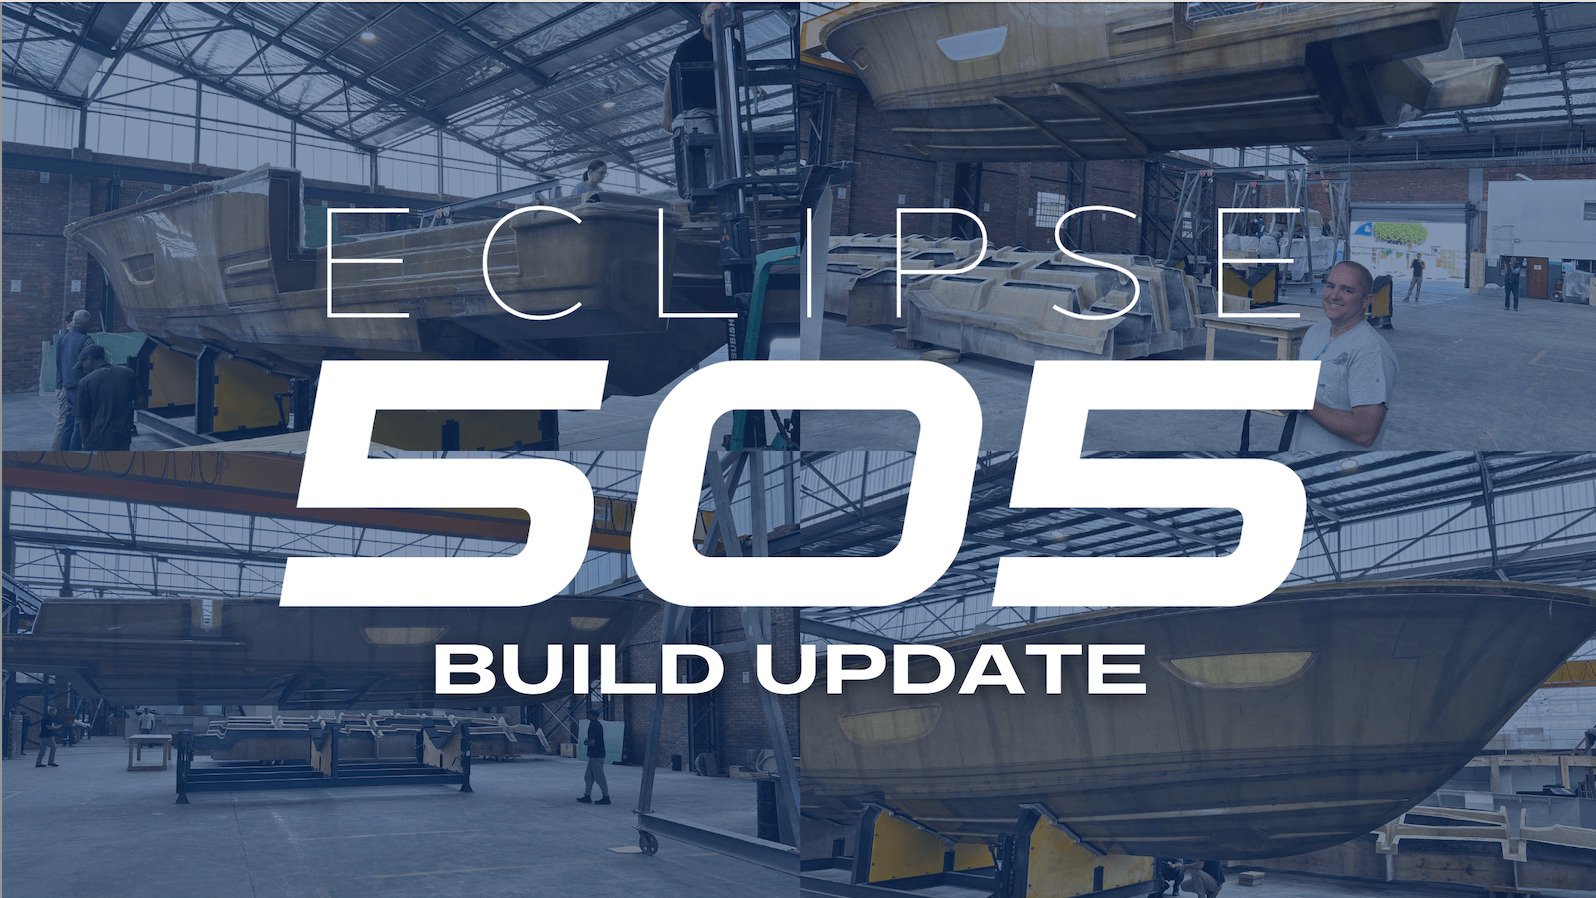 Latest Update on The ECLIPSE 505